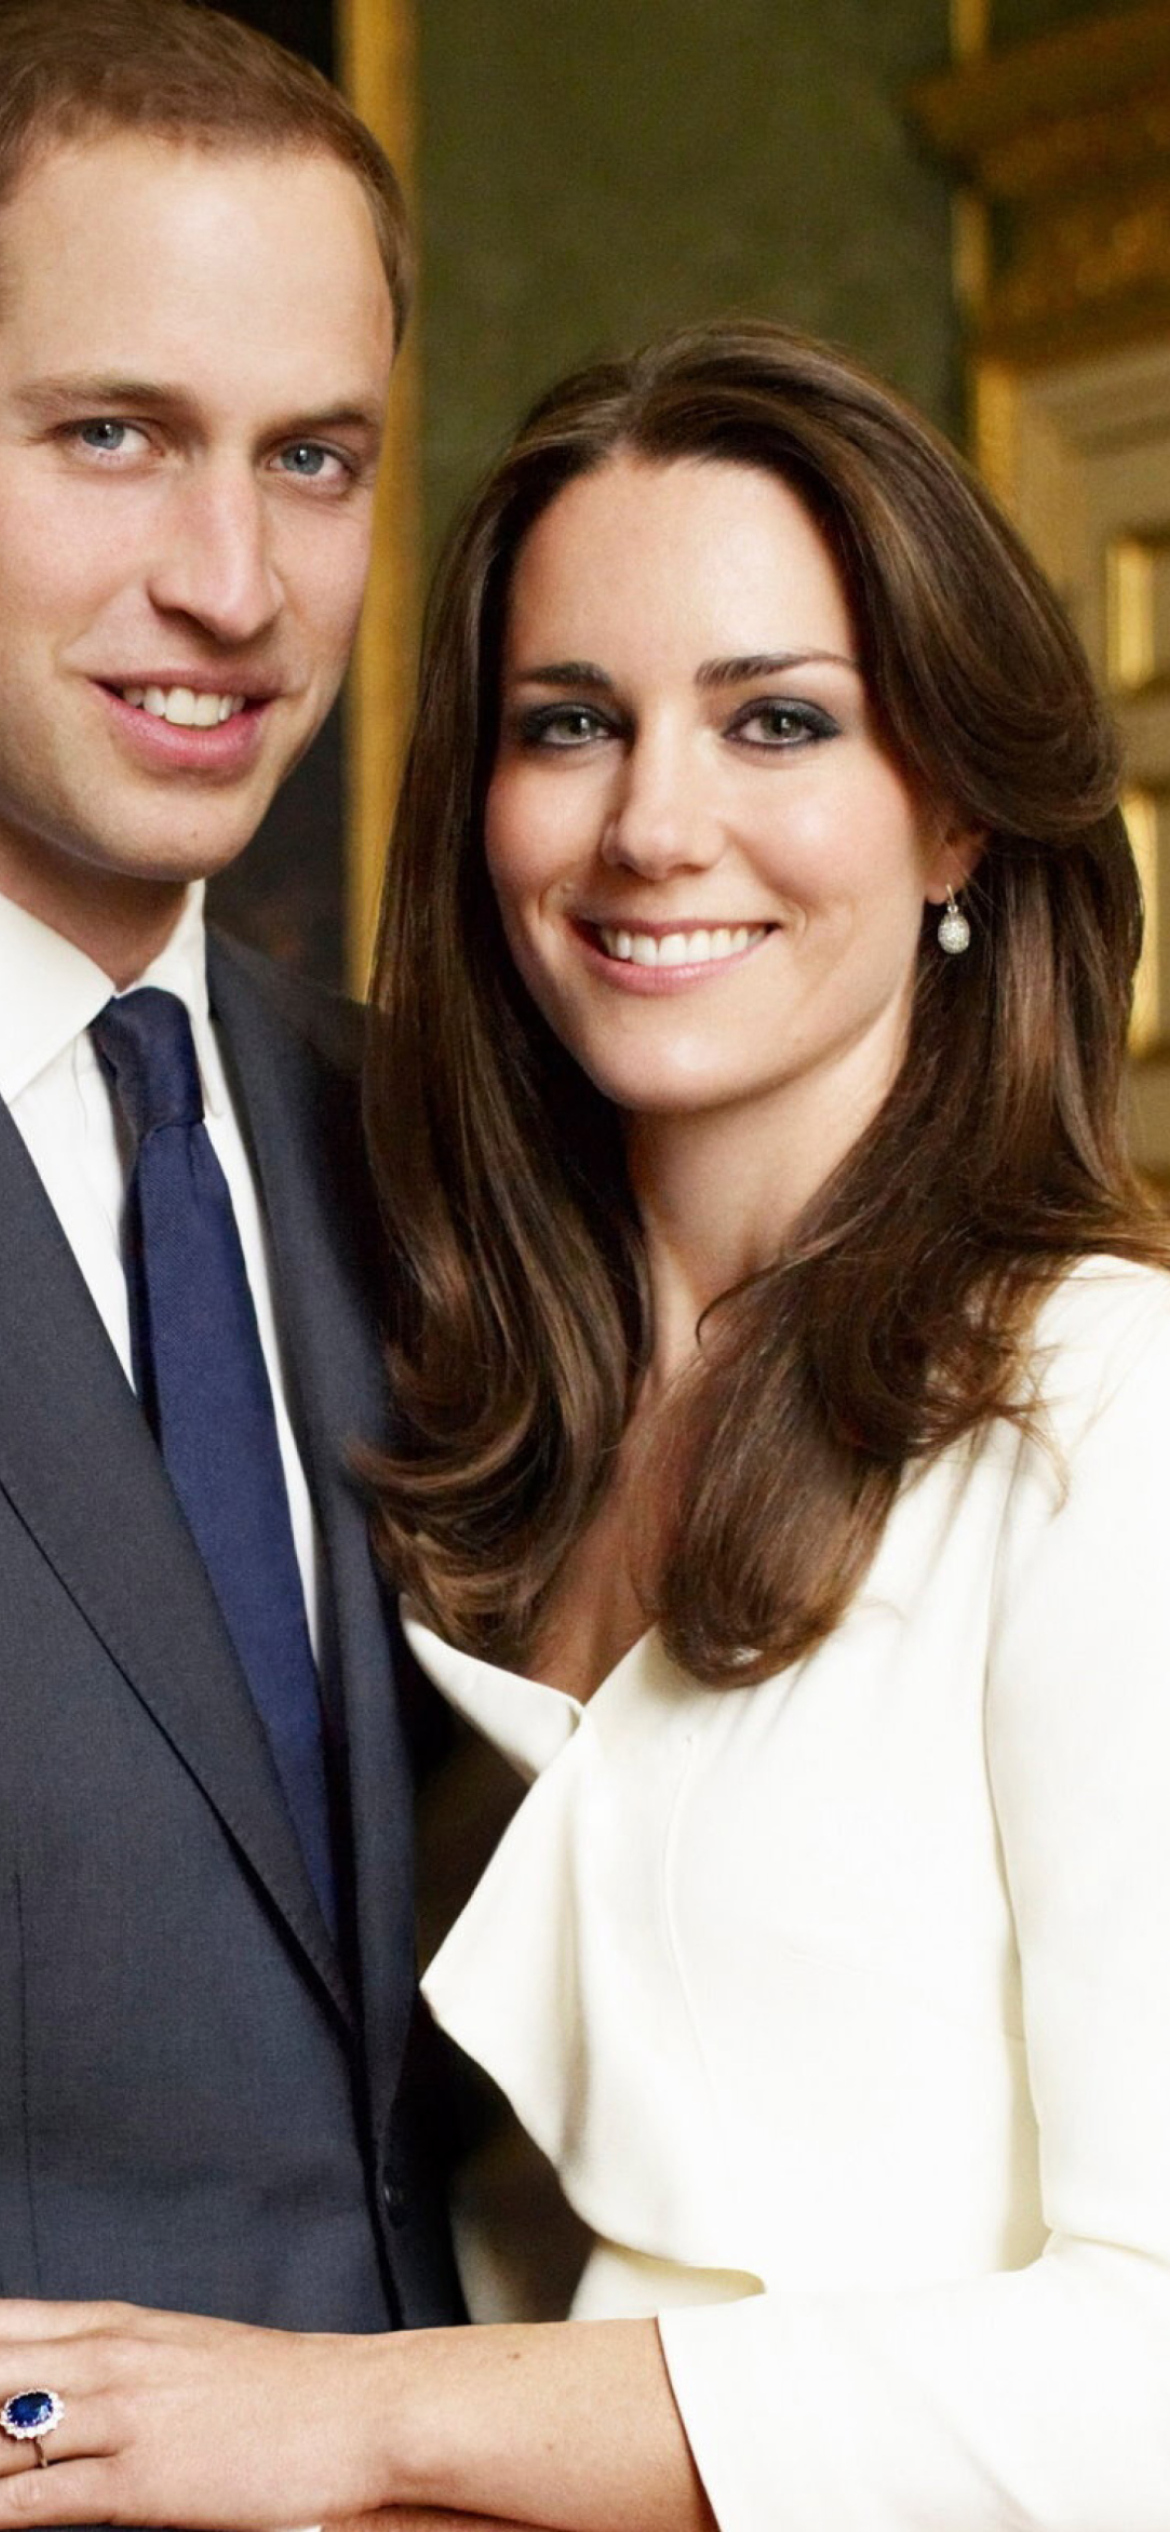 Prince William And Kate Middleton wallpaper 1170x2532